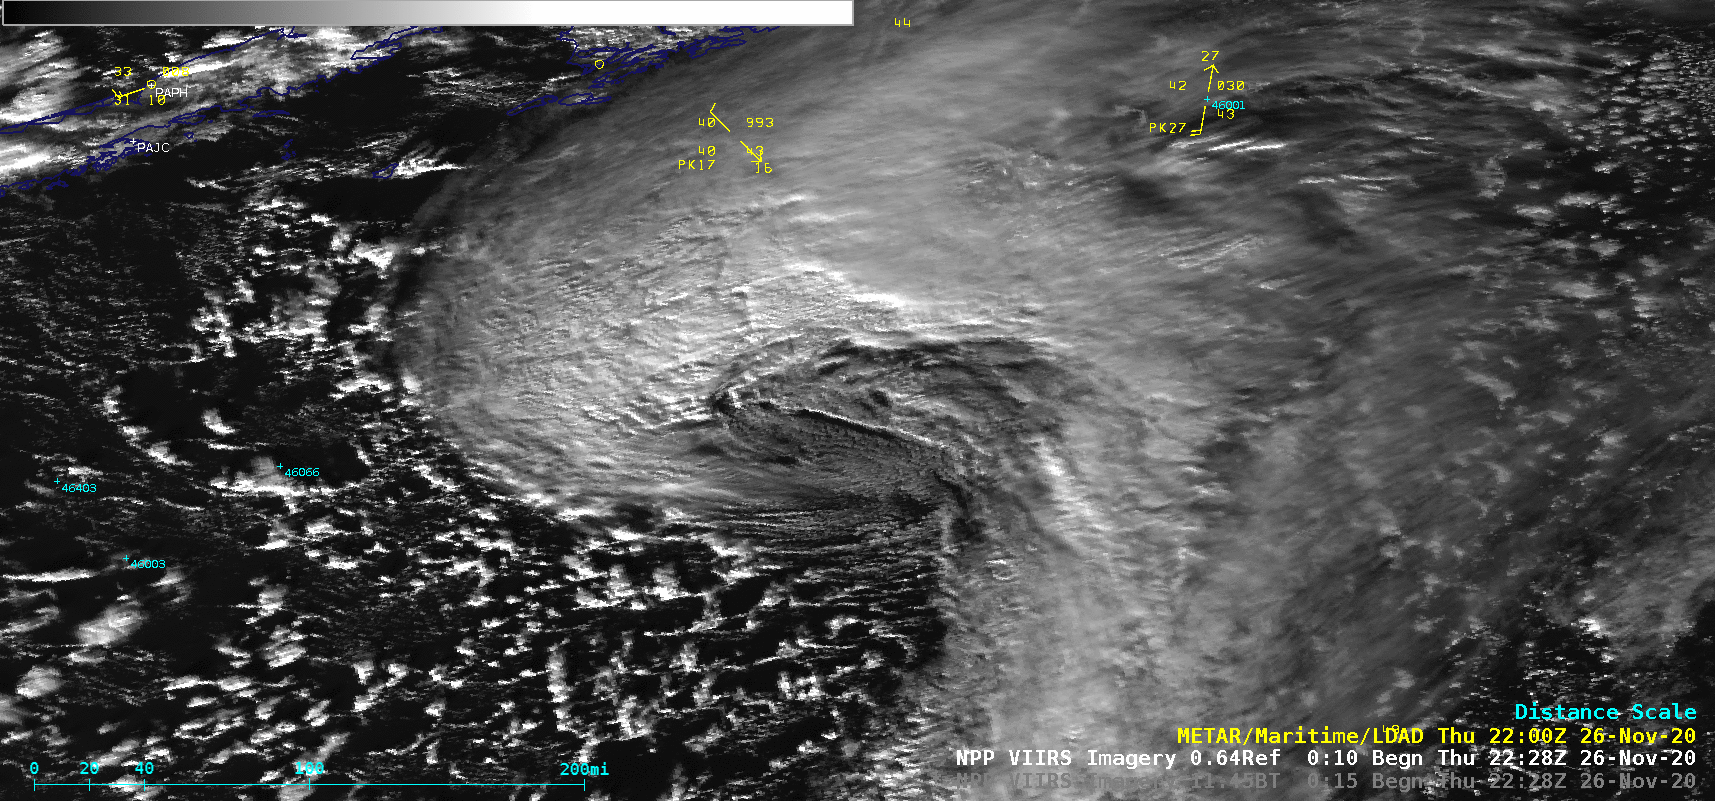 Suomi NPP VIIRS Visible (0.64 µm) and Infrared Window (11.45 µm) images [click to enlarge]